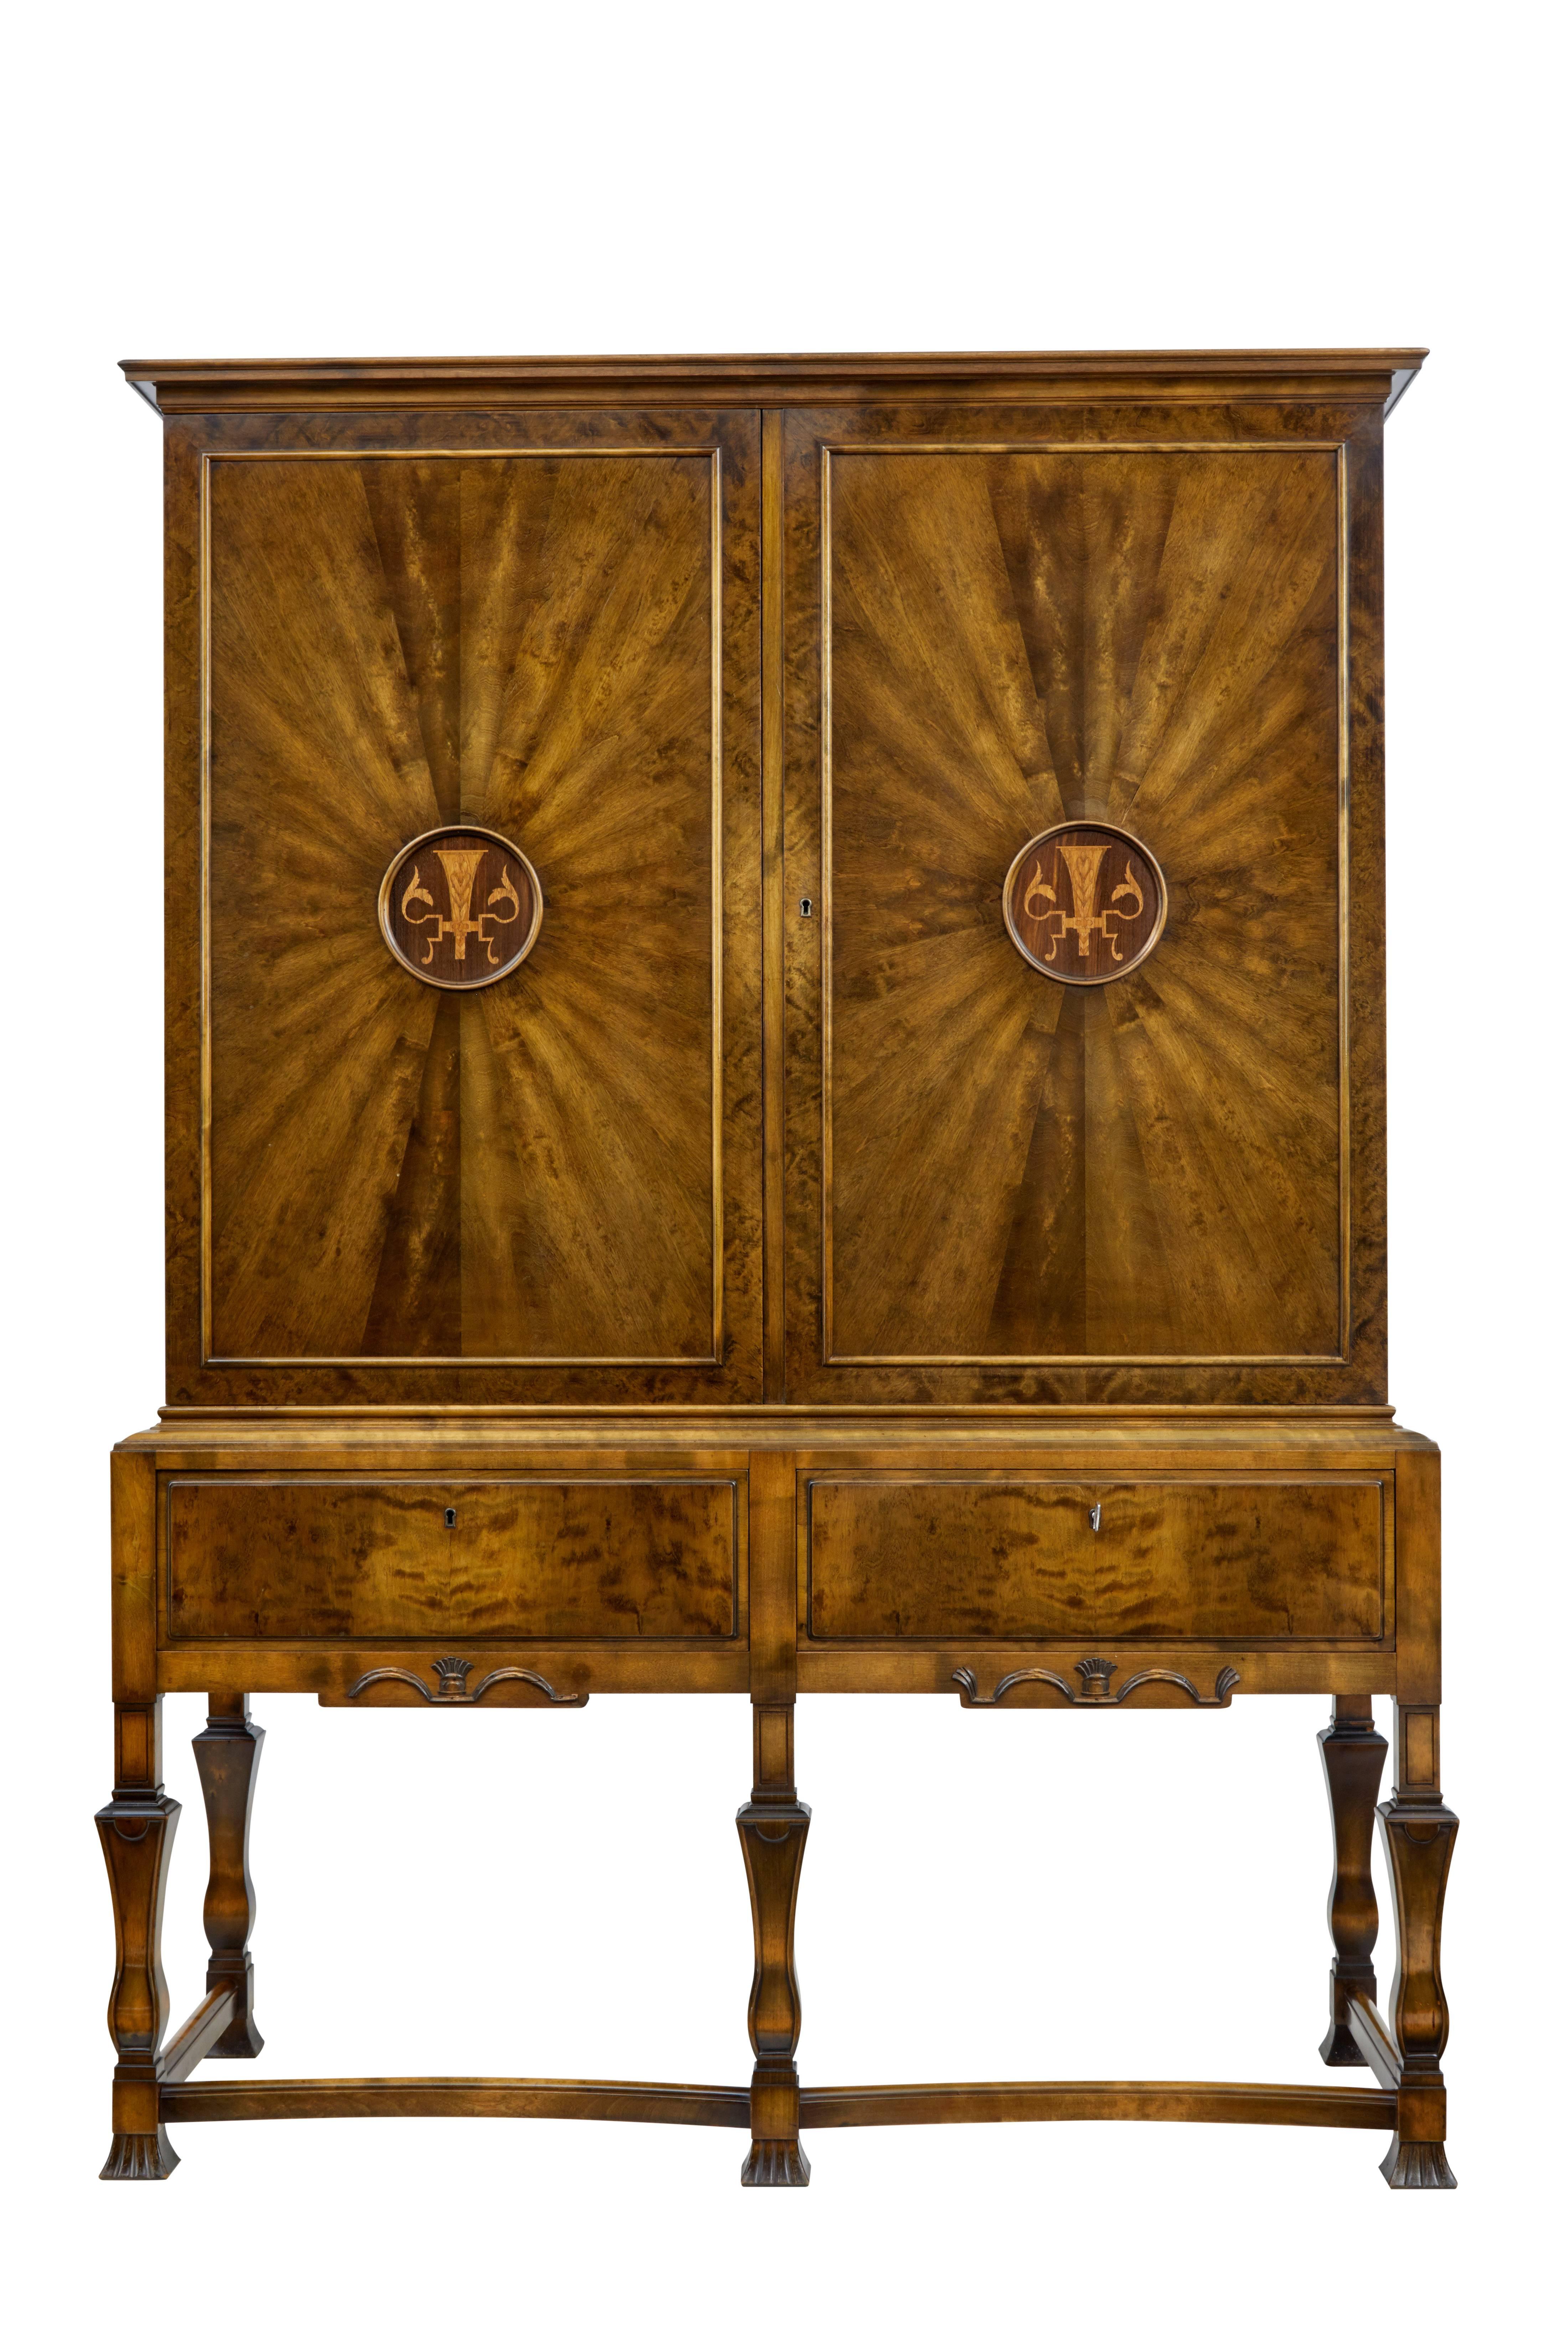 Here we can offer you a stunning one piece pure Art Deco cabinet, circa 1920.
Made from beautiful burr birch.
Segmented patterned door fronts, with inlaid central detailing.
Double doors open to a contrasting light birch interior with three